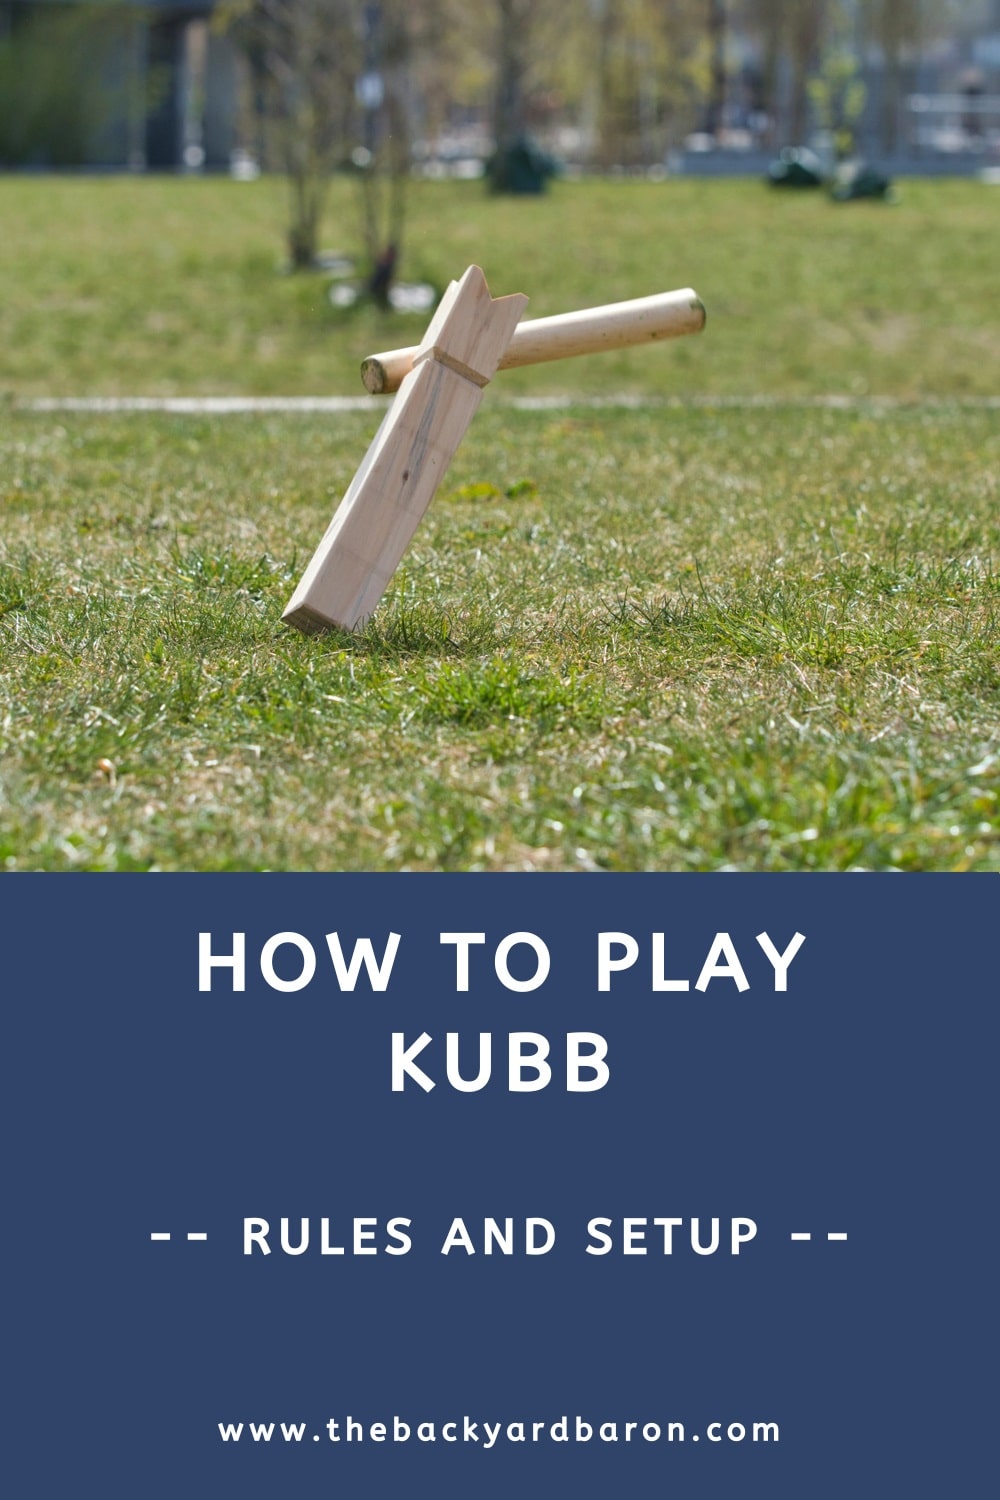 How to play kubb (rules and setup)